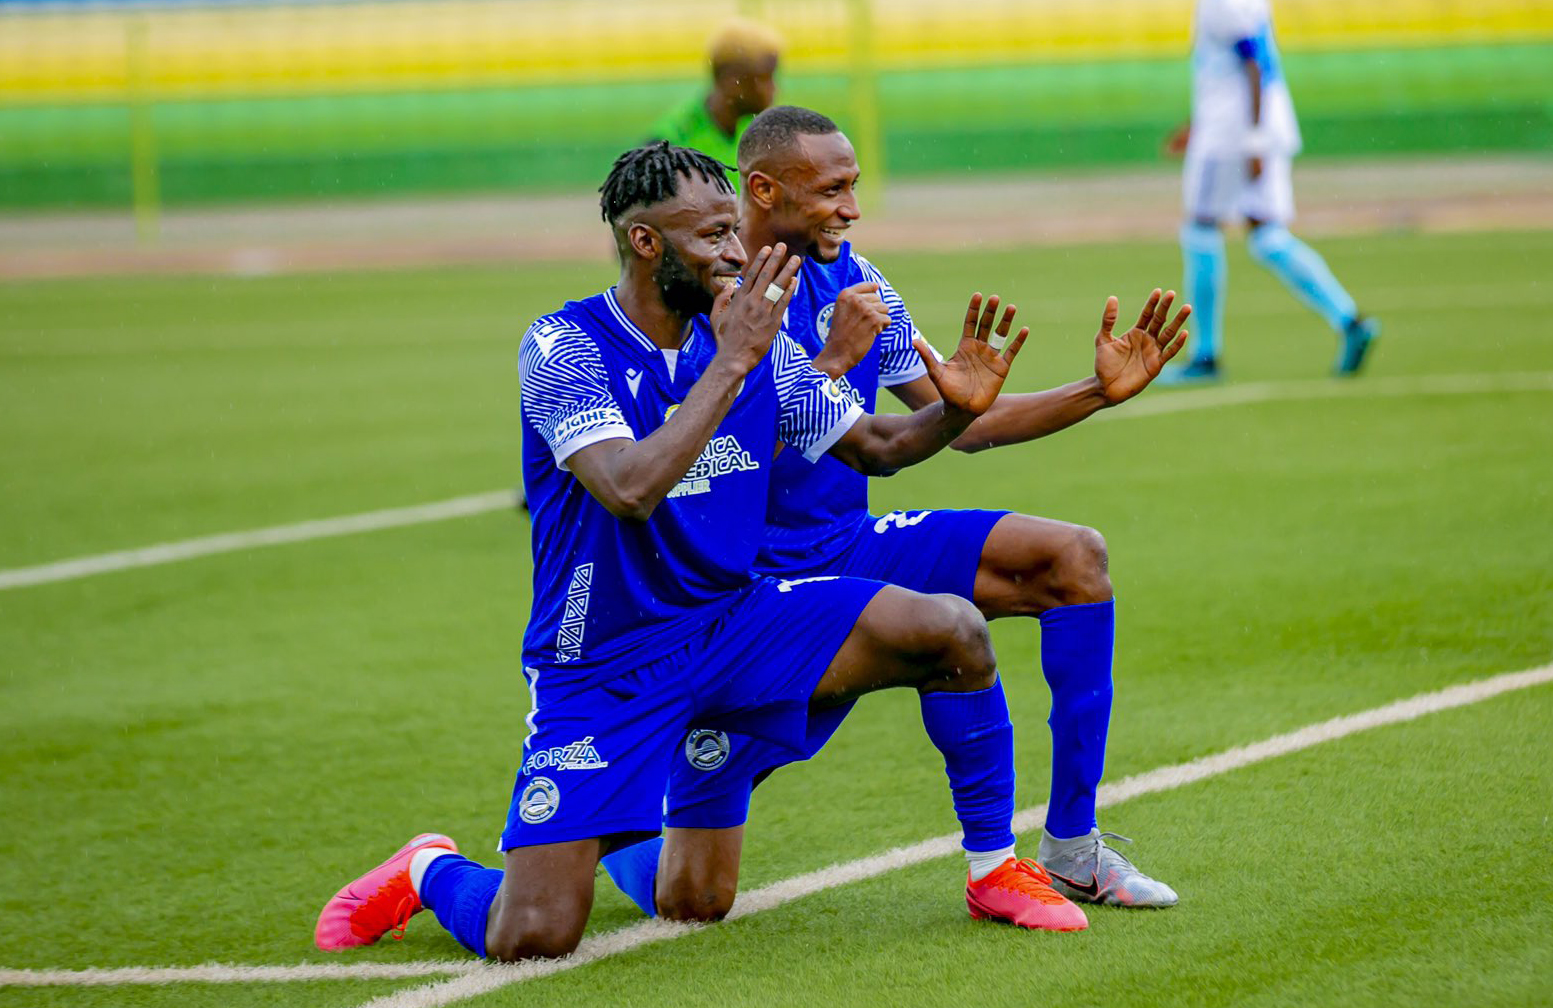 Shabalala celebrates his goal with his teammate during the match